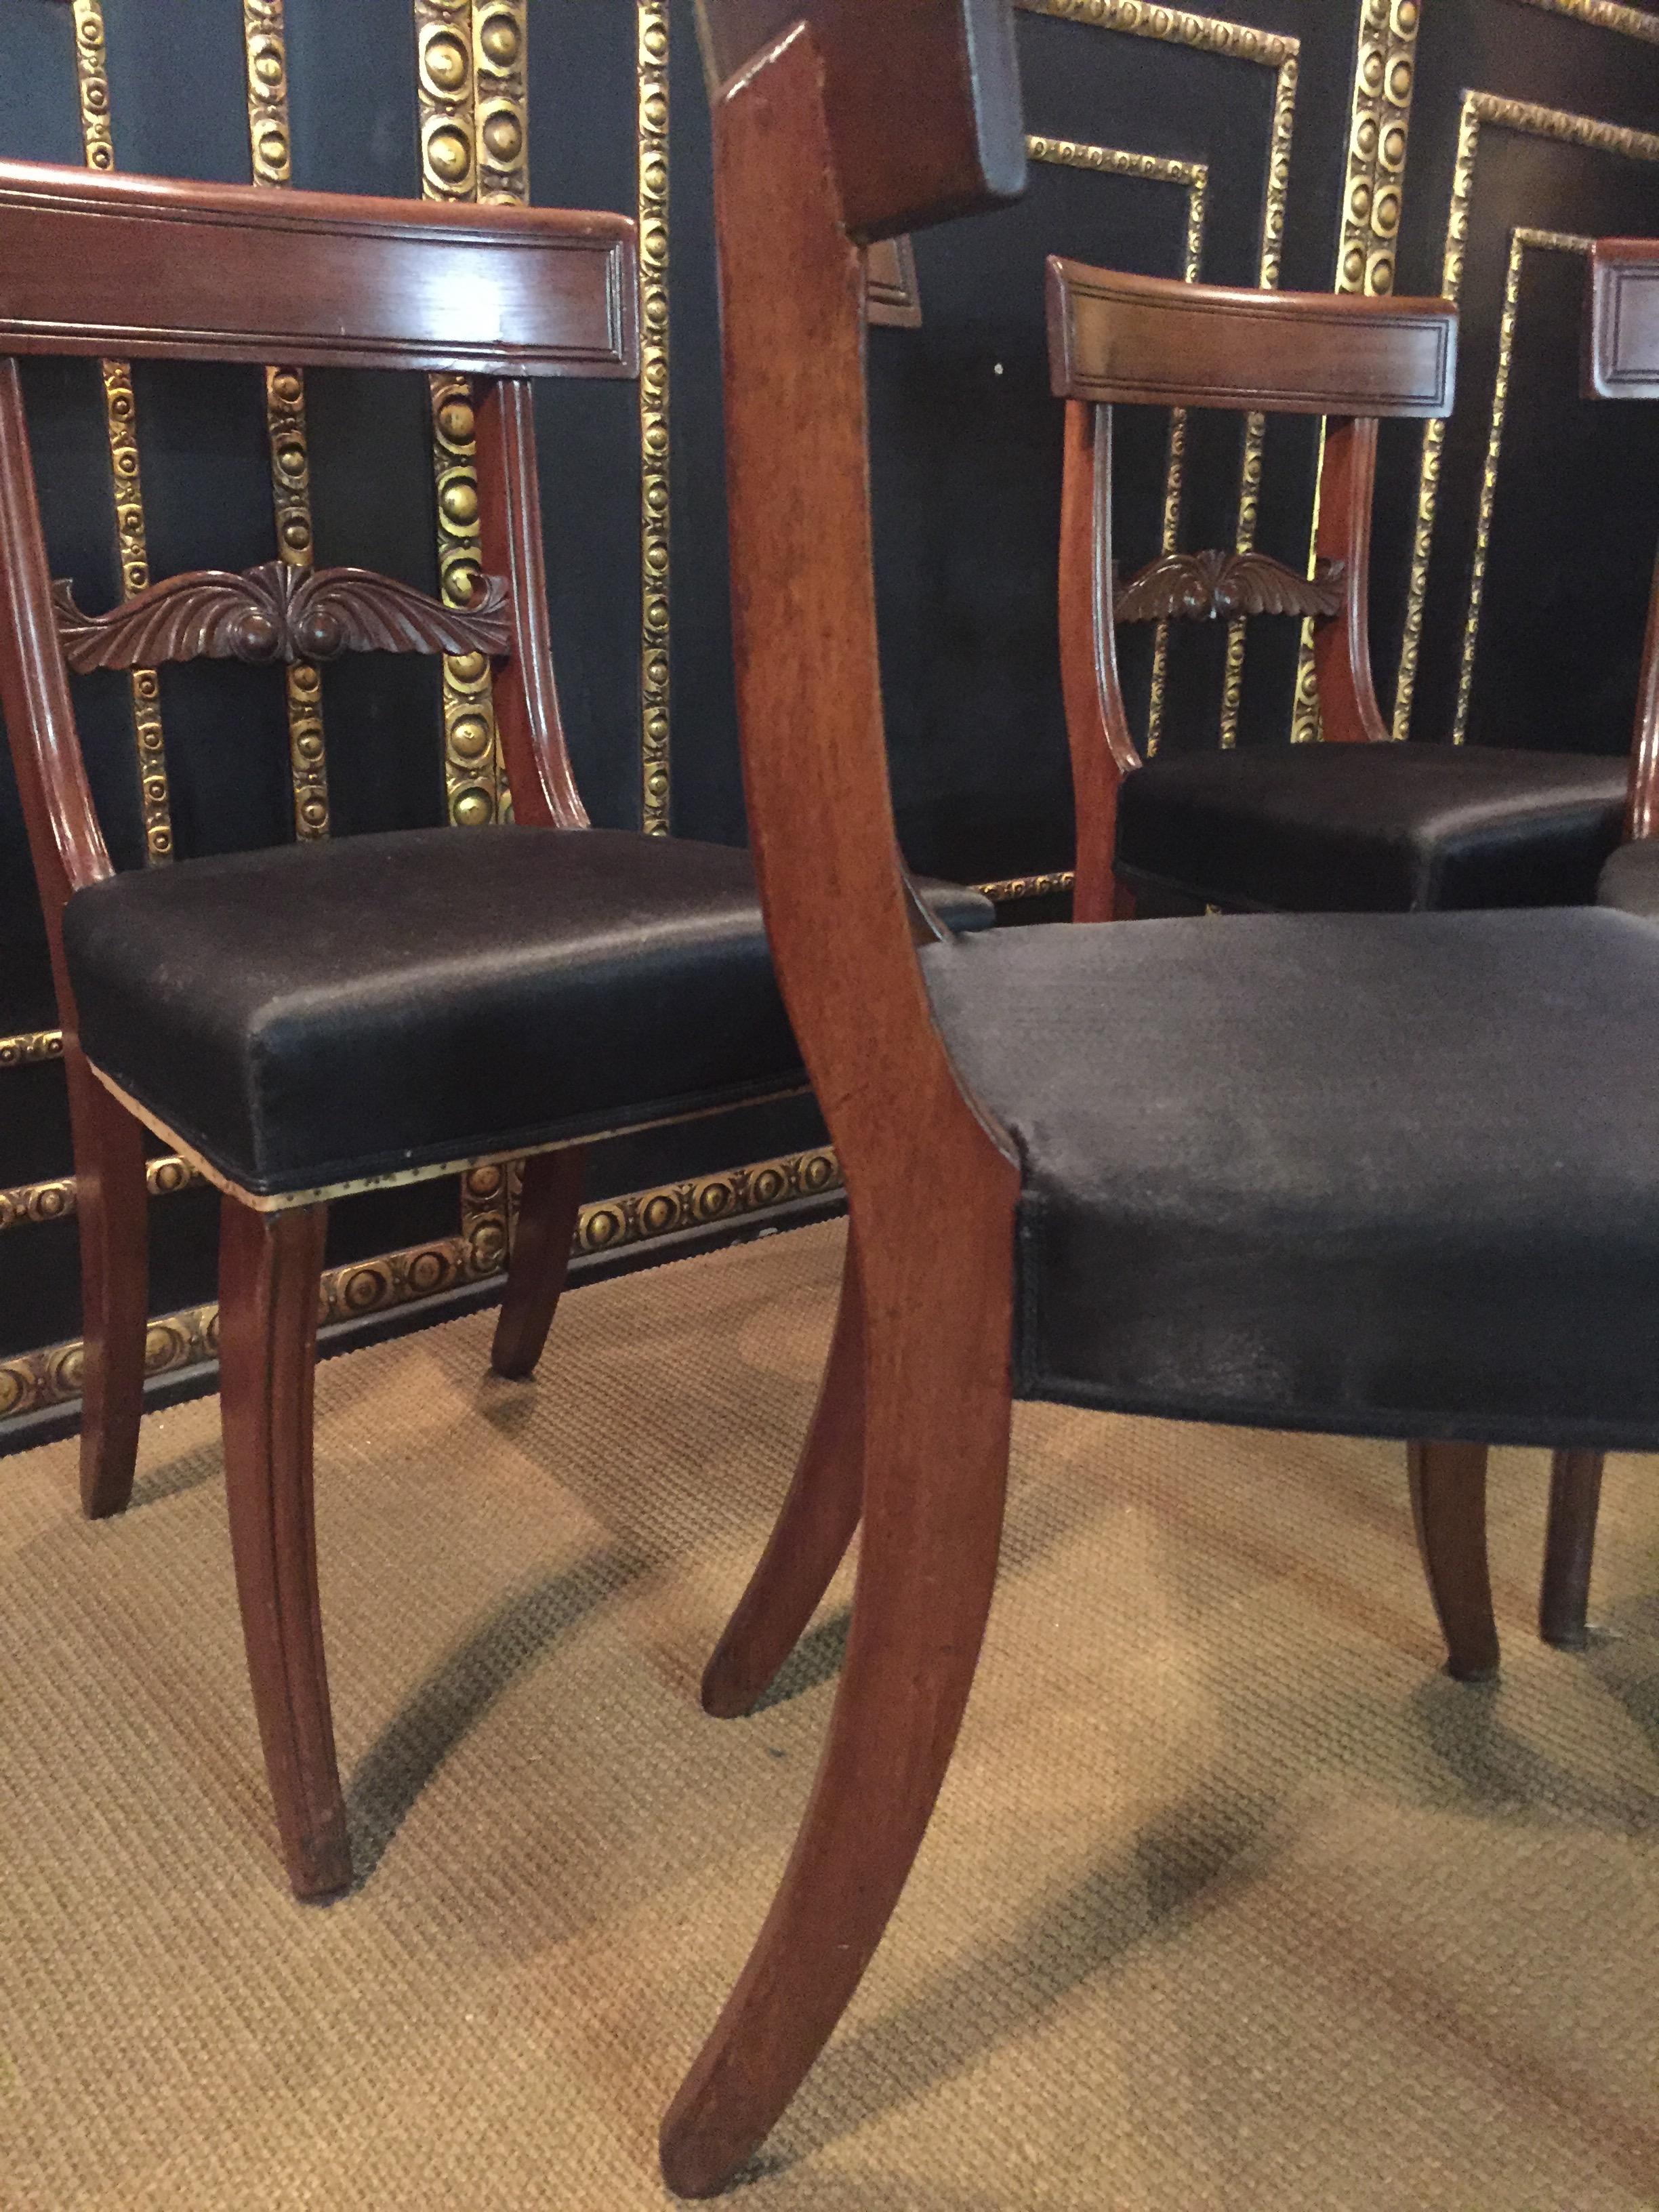 19th Century 4 Biedermeier Saber-Legs Chairs Are Solid Mahogany 4